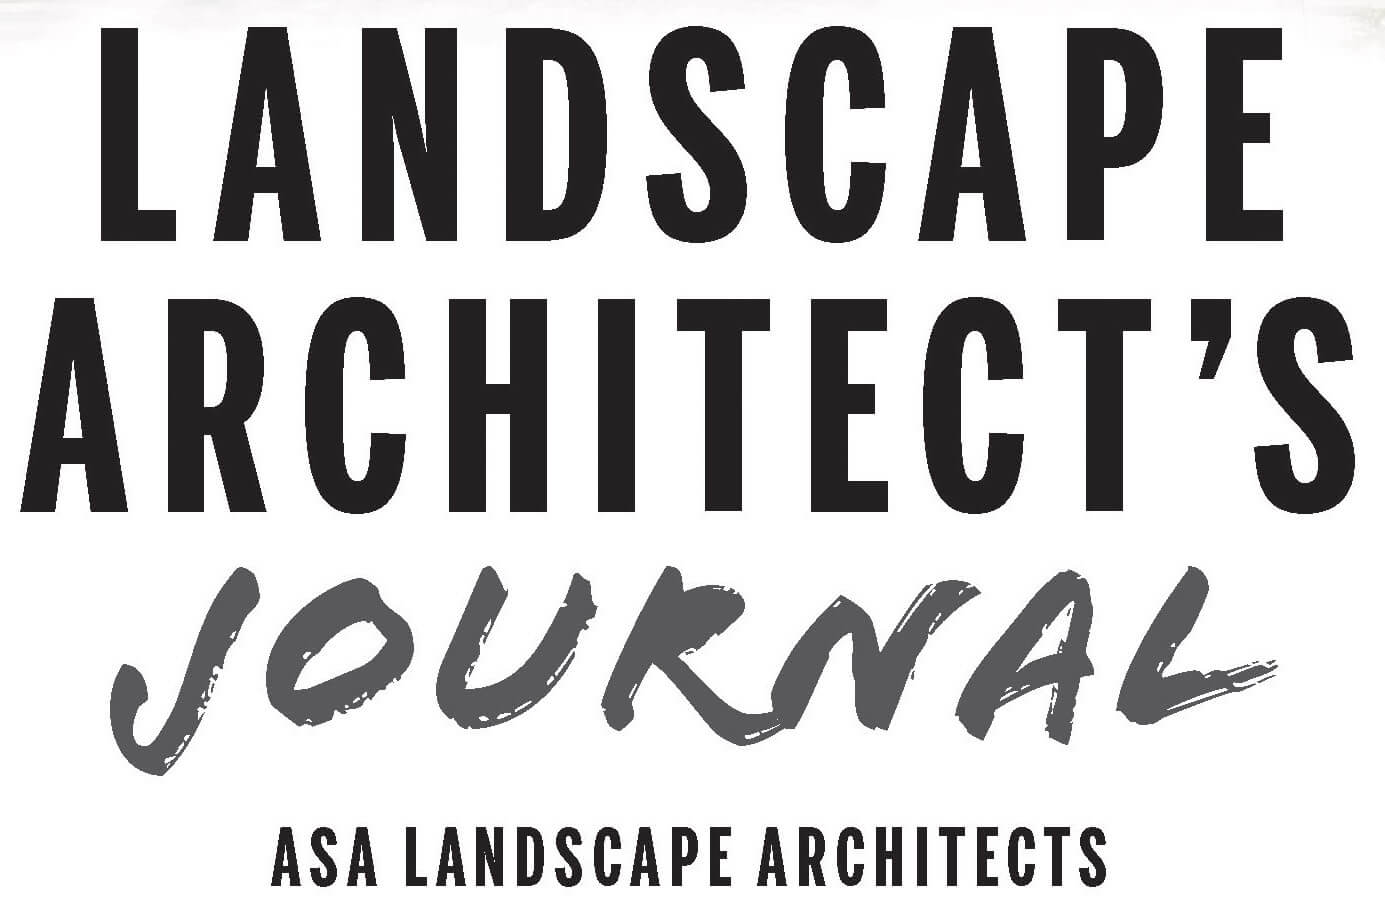 Landscape Architects Journal featured